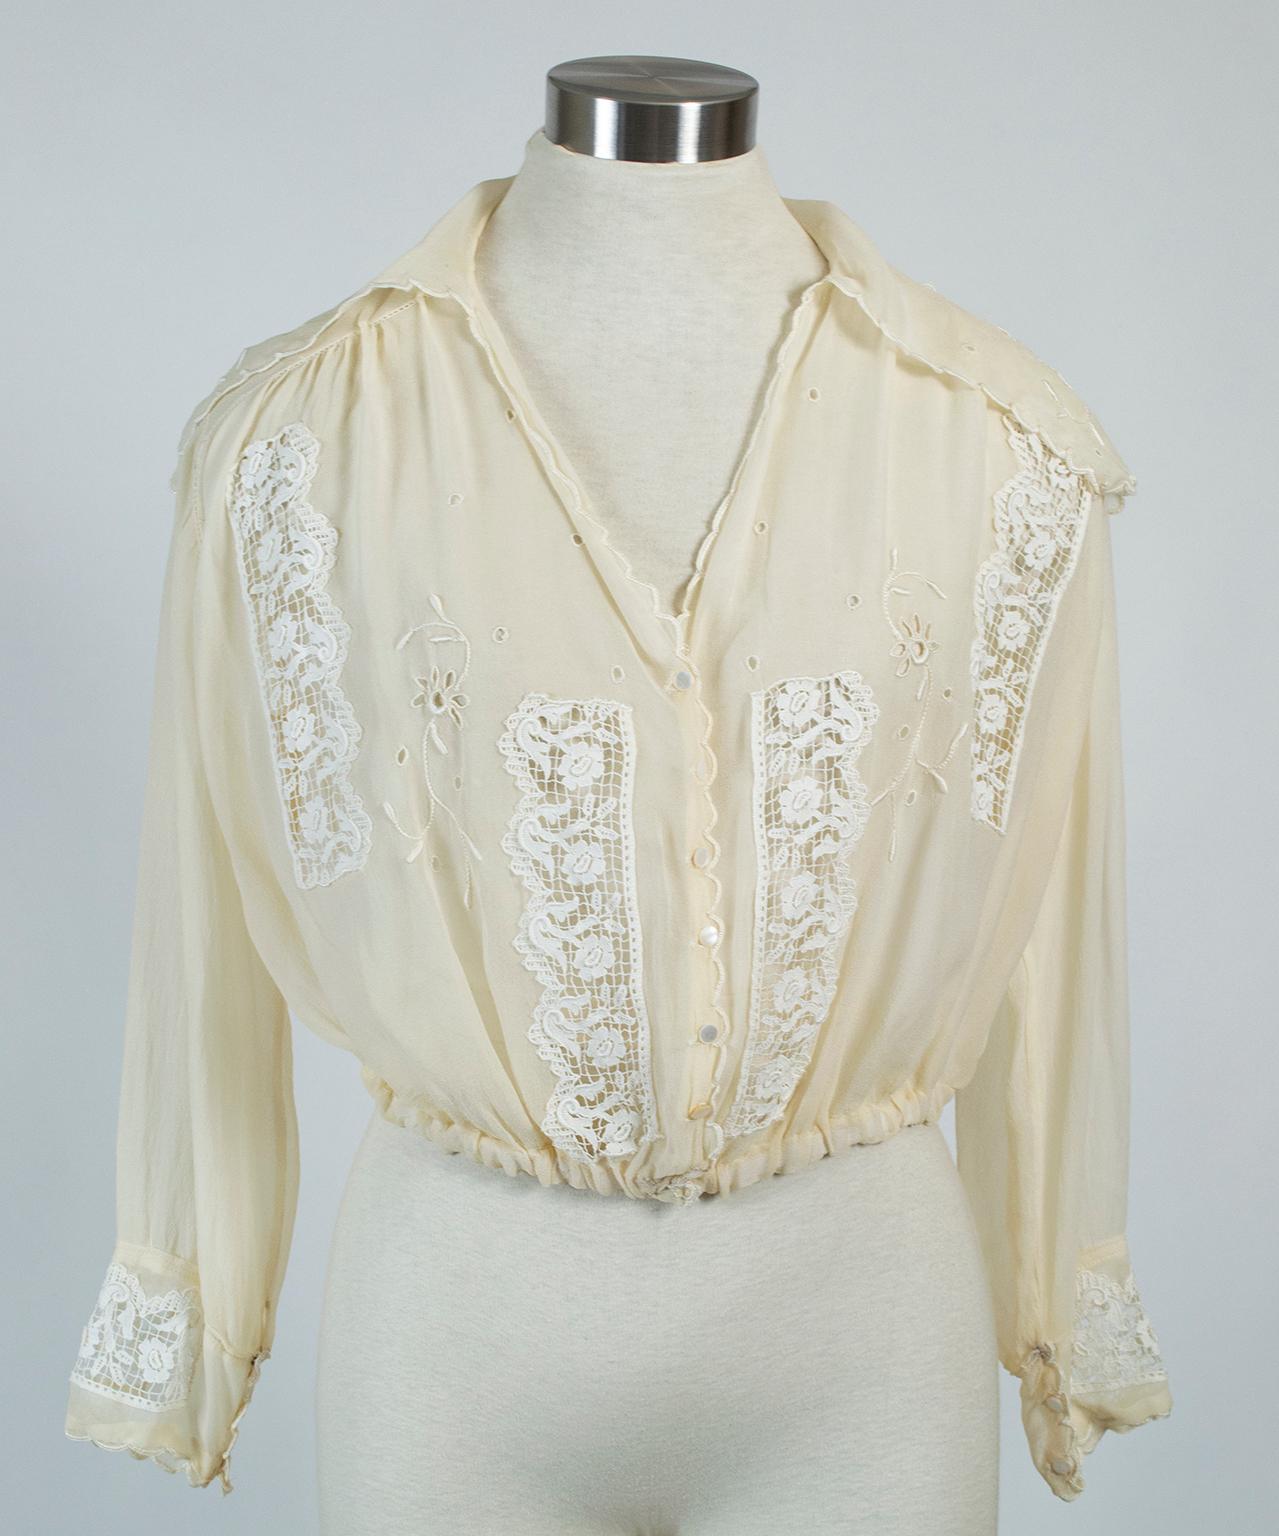 The best of both worlds, this century-old blouse combines ultra-feminine edge scallops, lace insets and a dramatic neckline plunge with an androgynous rear bib to create a unique garment that can be dressed up or down. We love the contrast of the